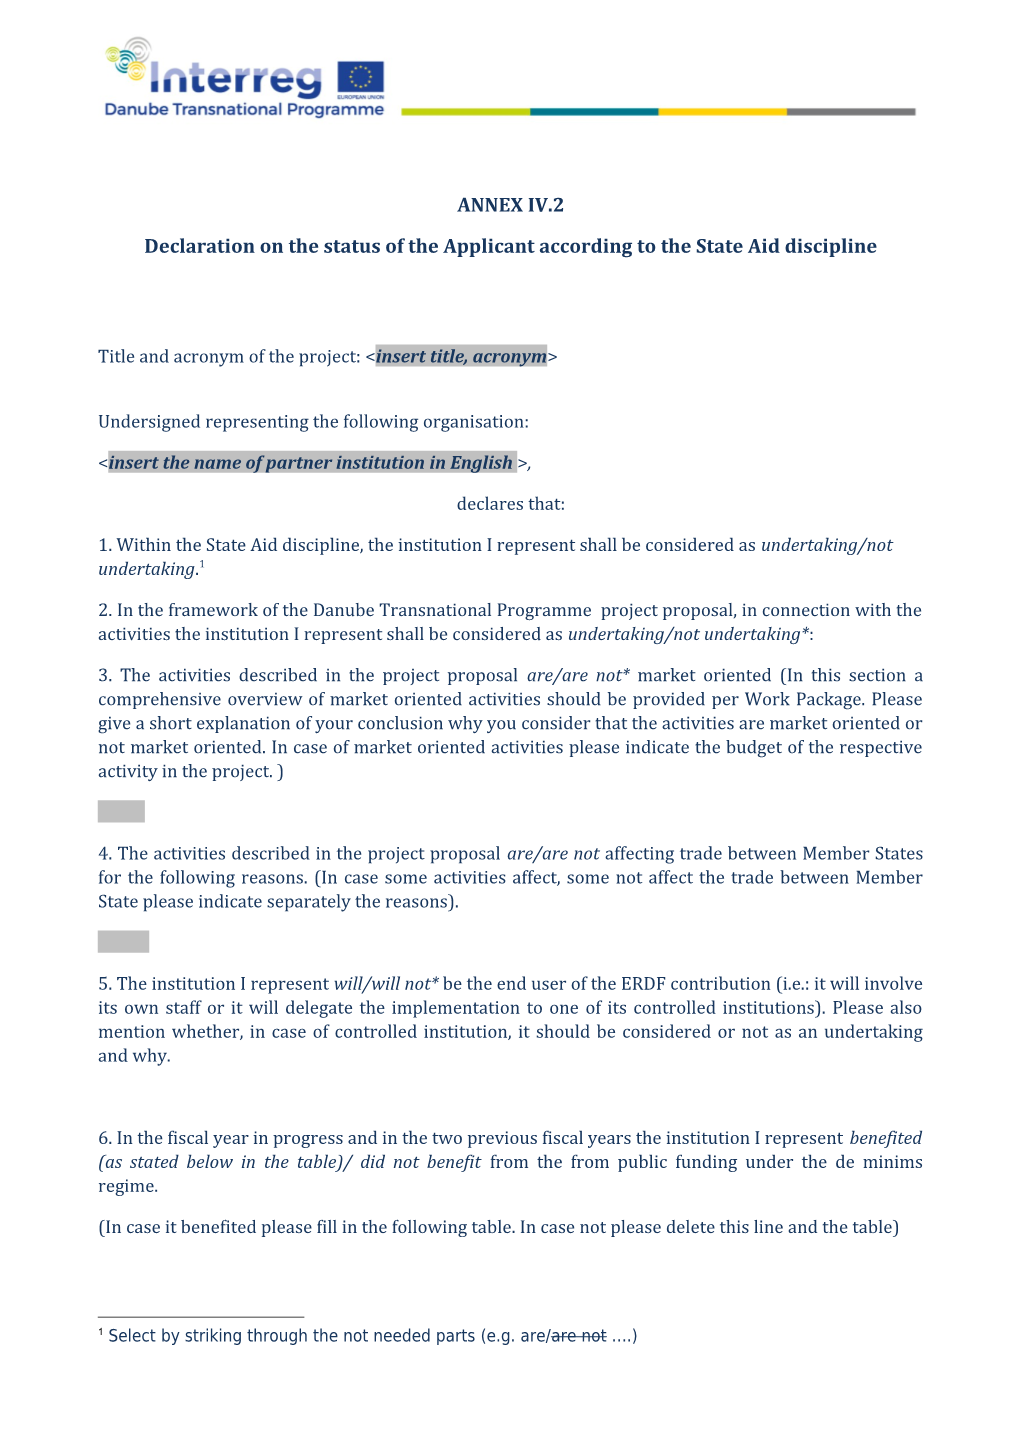 Declaration on the Status of the Applicant According to the State Aid Discipline